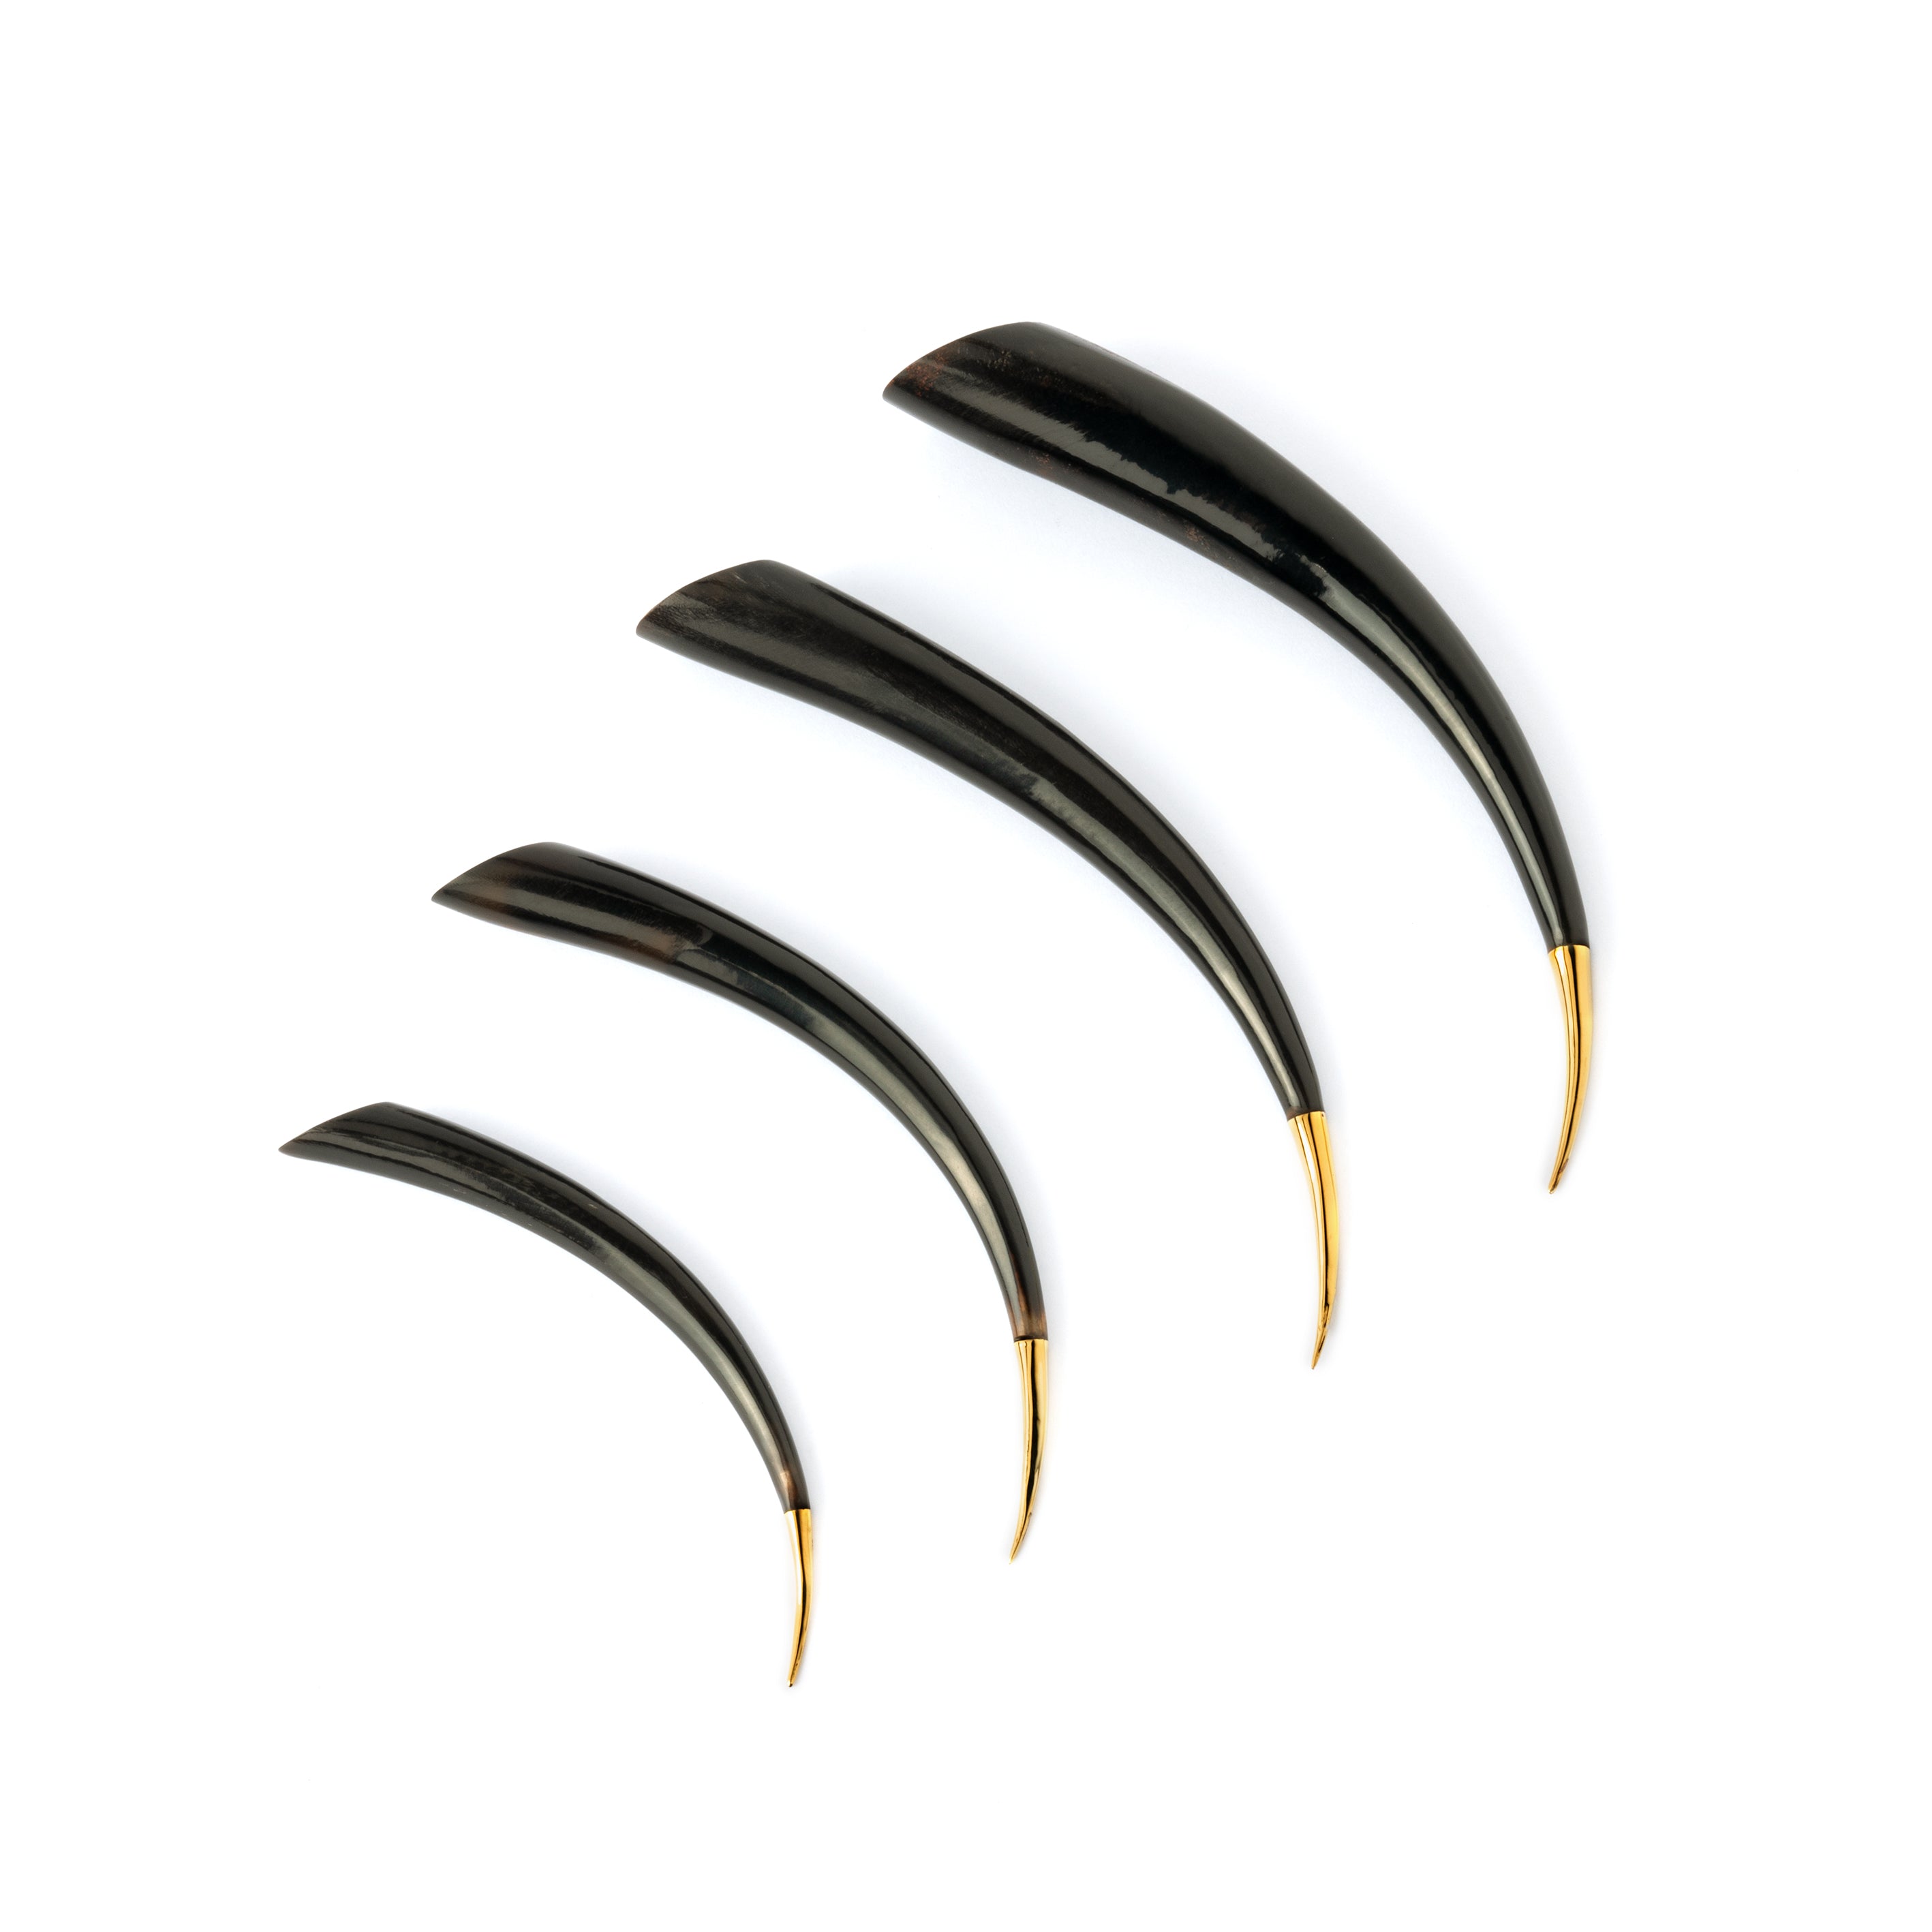 several sizes of Black spike with golden tip ear stretchers side view